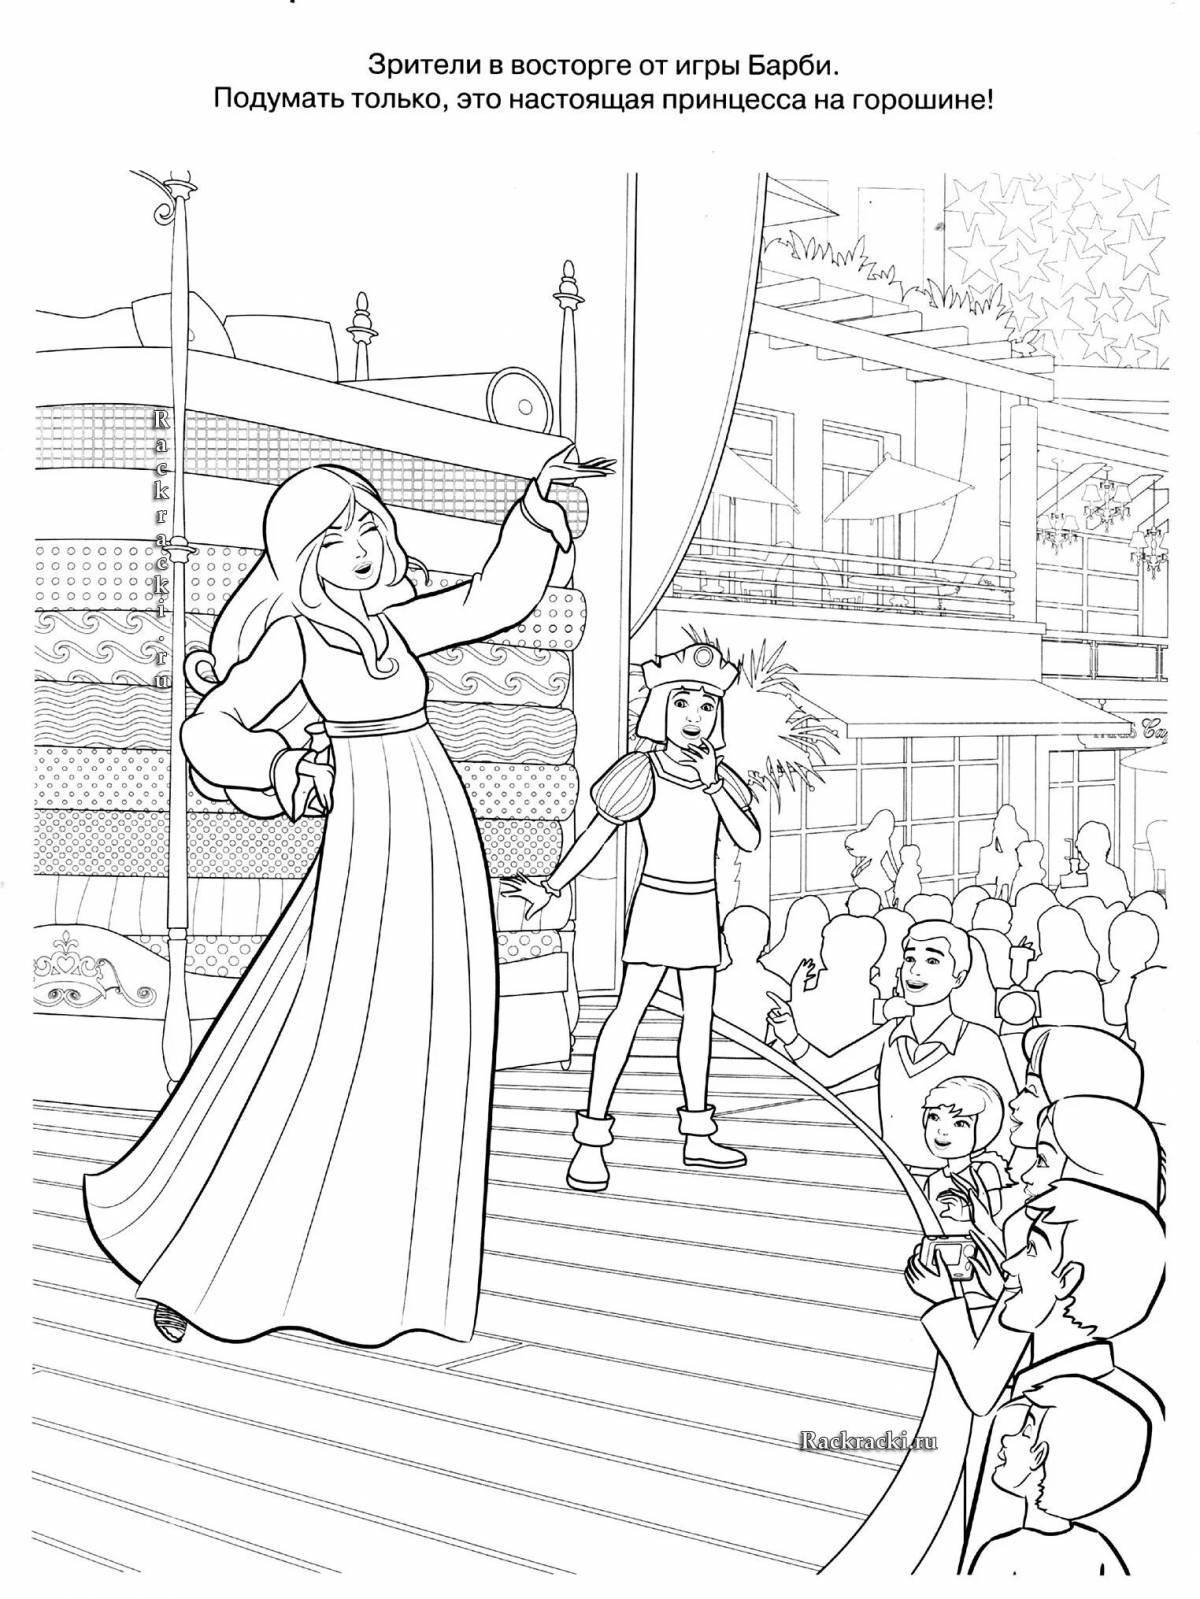 Fun theater poster coloring page